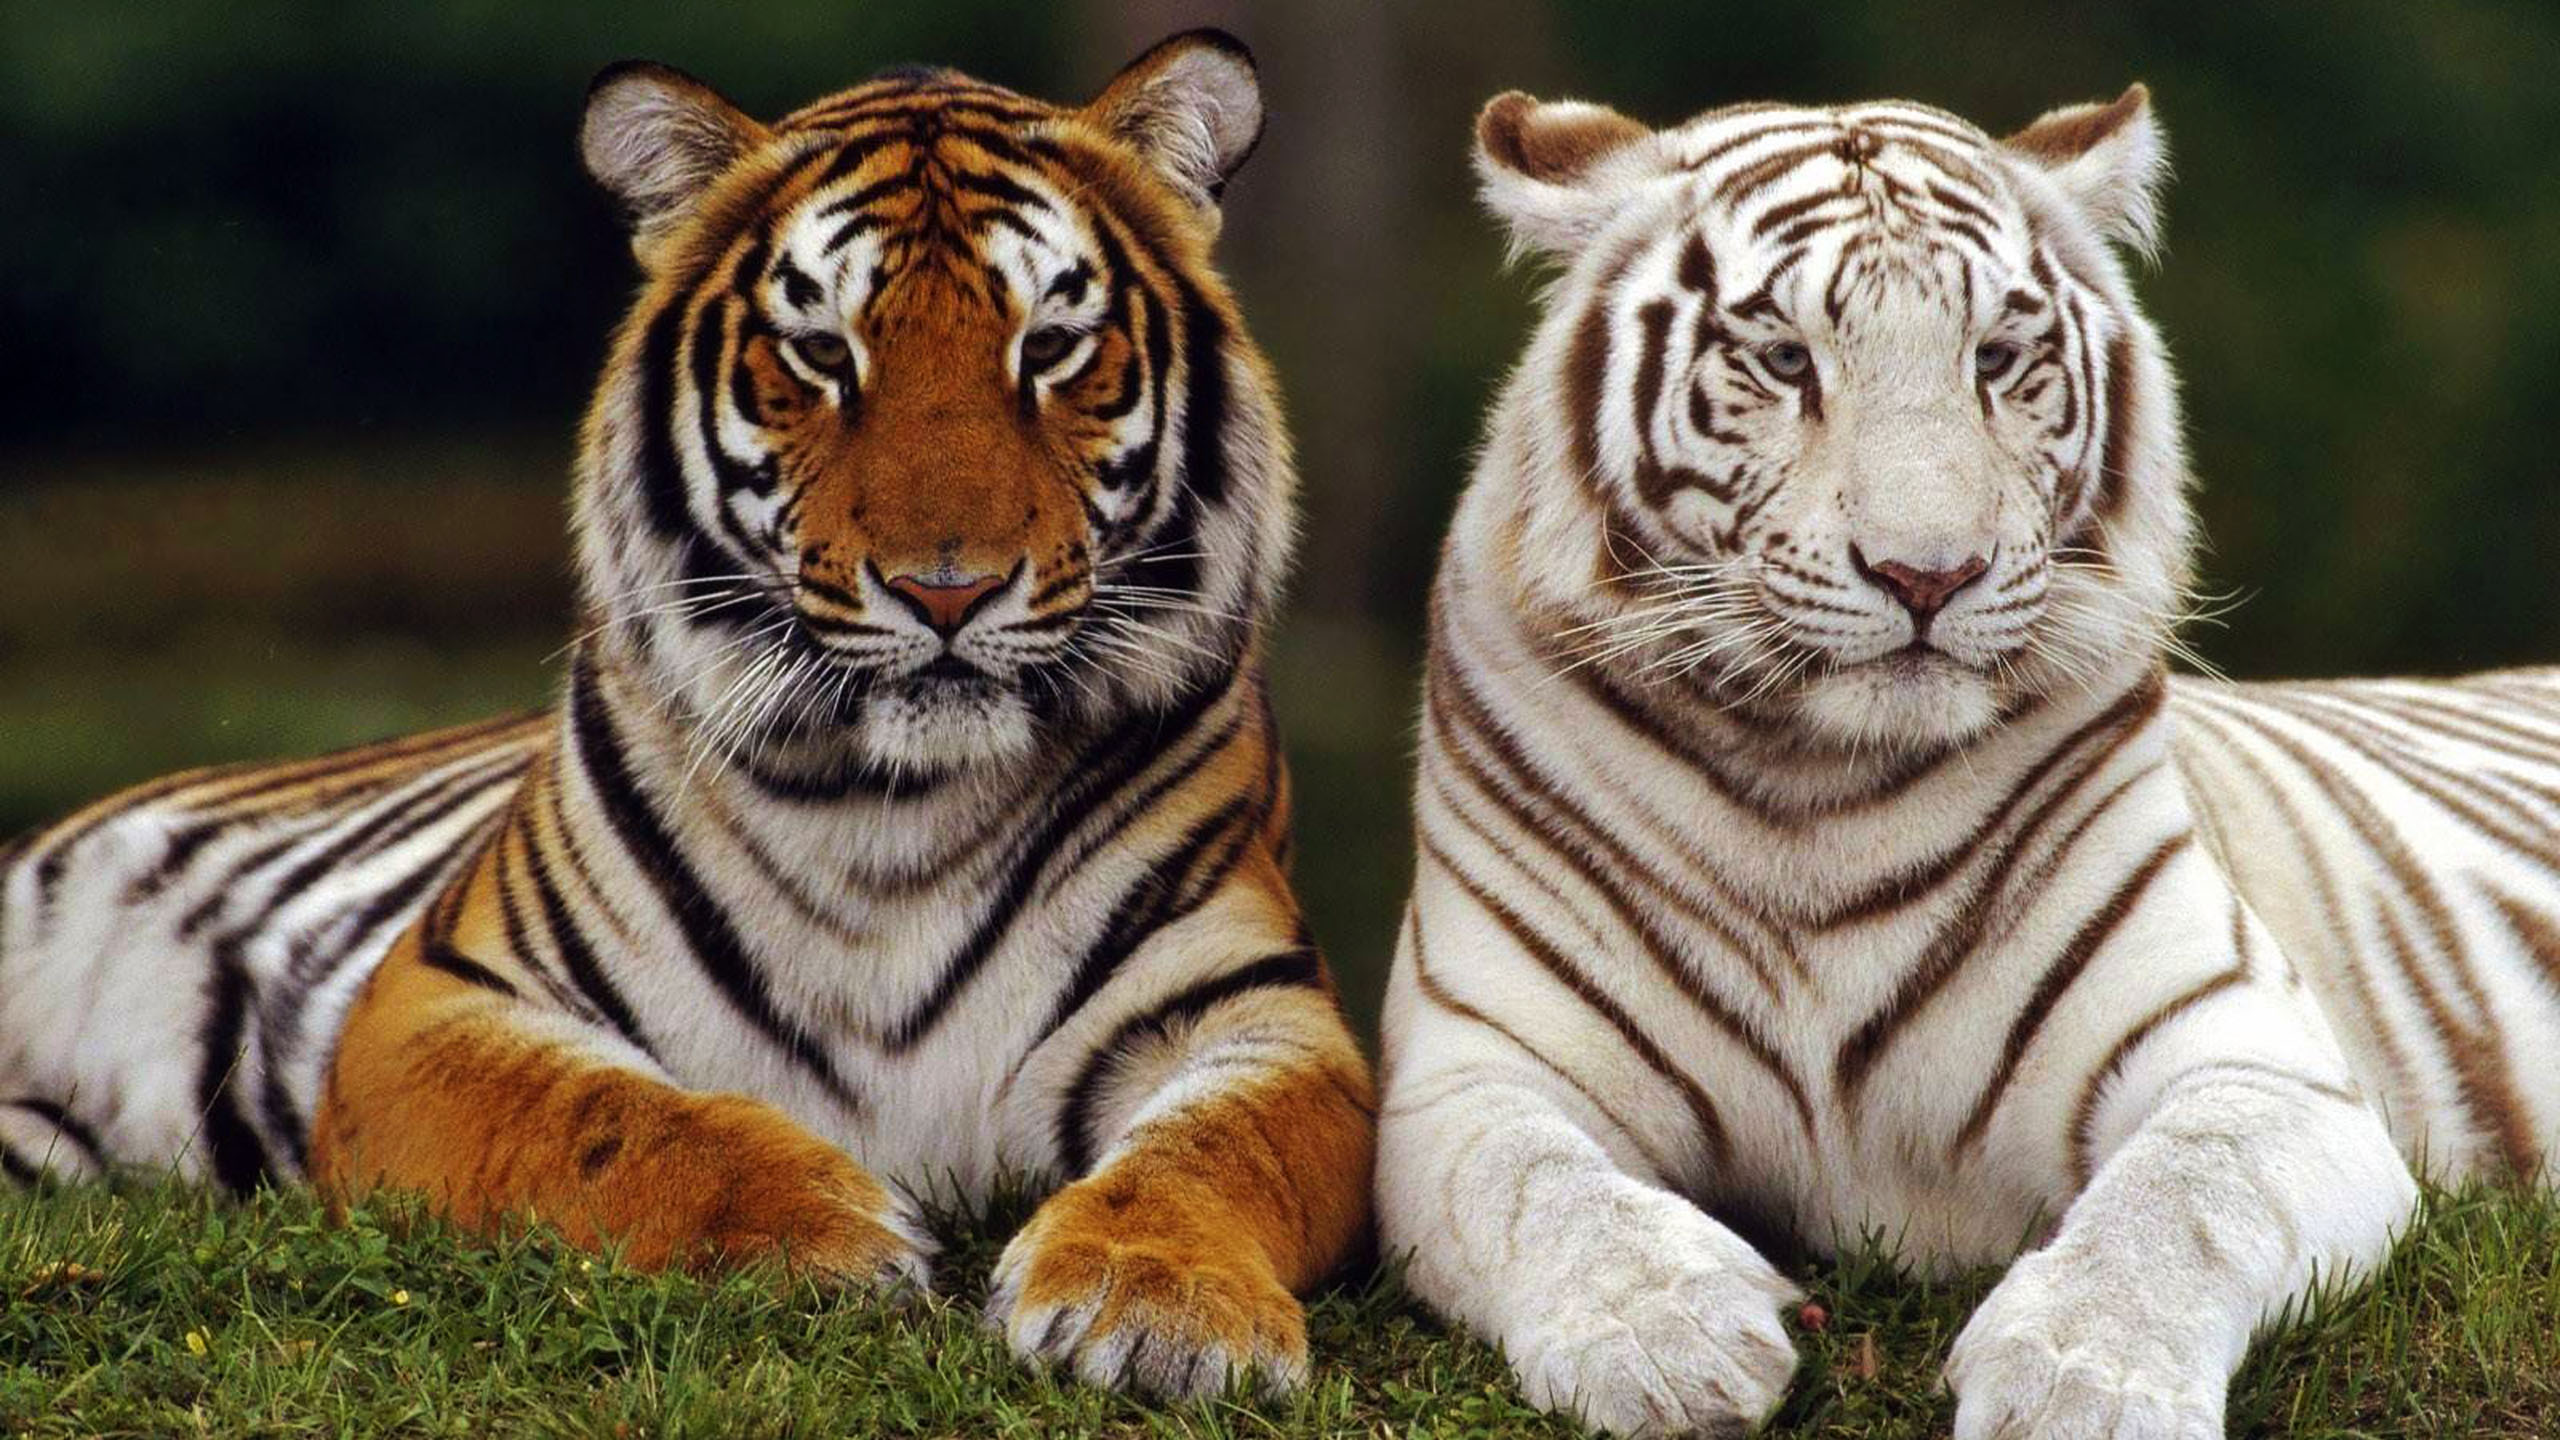 What is the difference between a Bengal tiger and a white tiger?